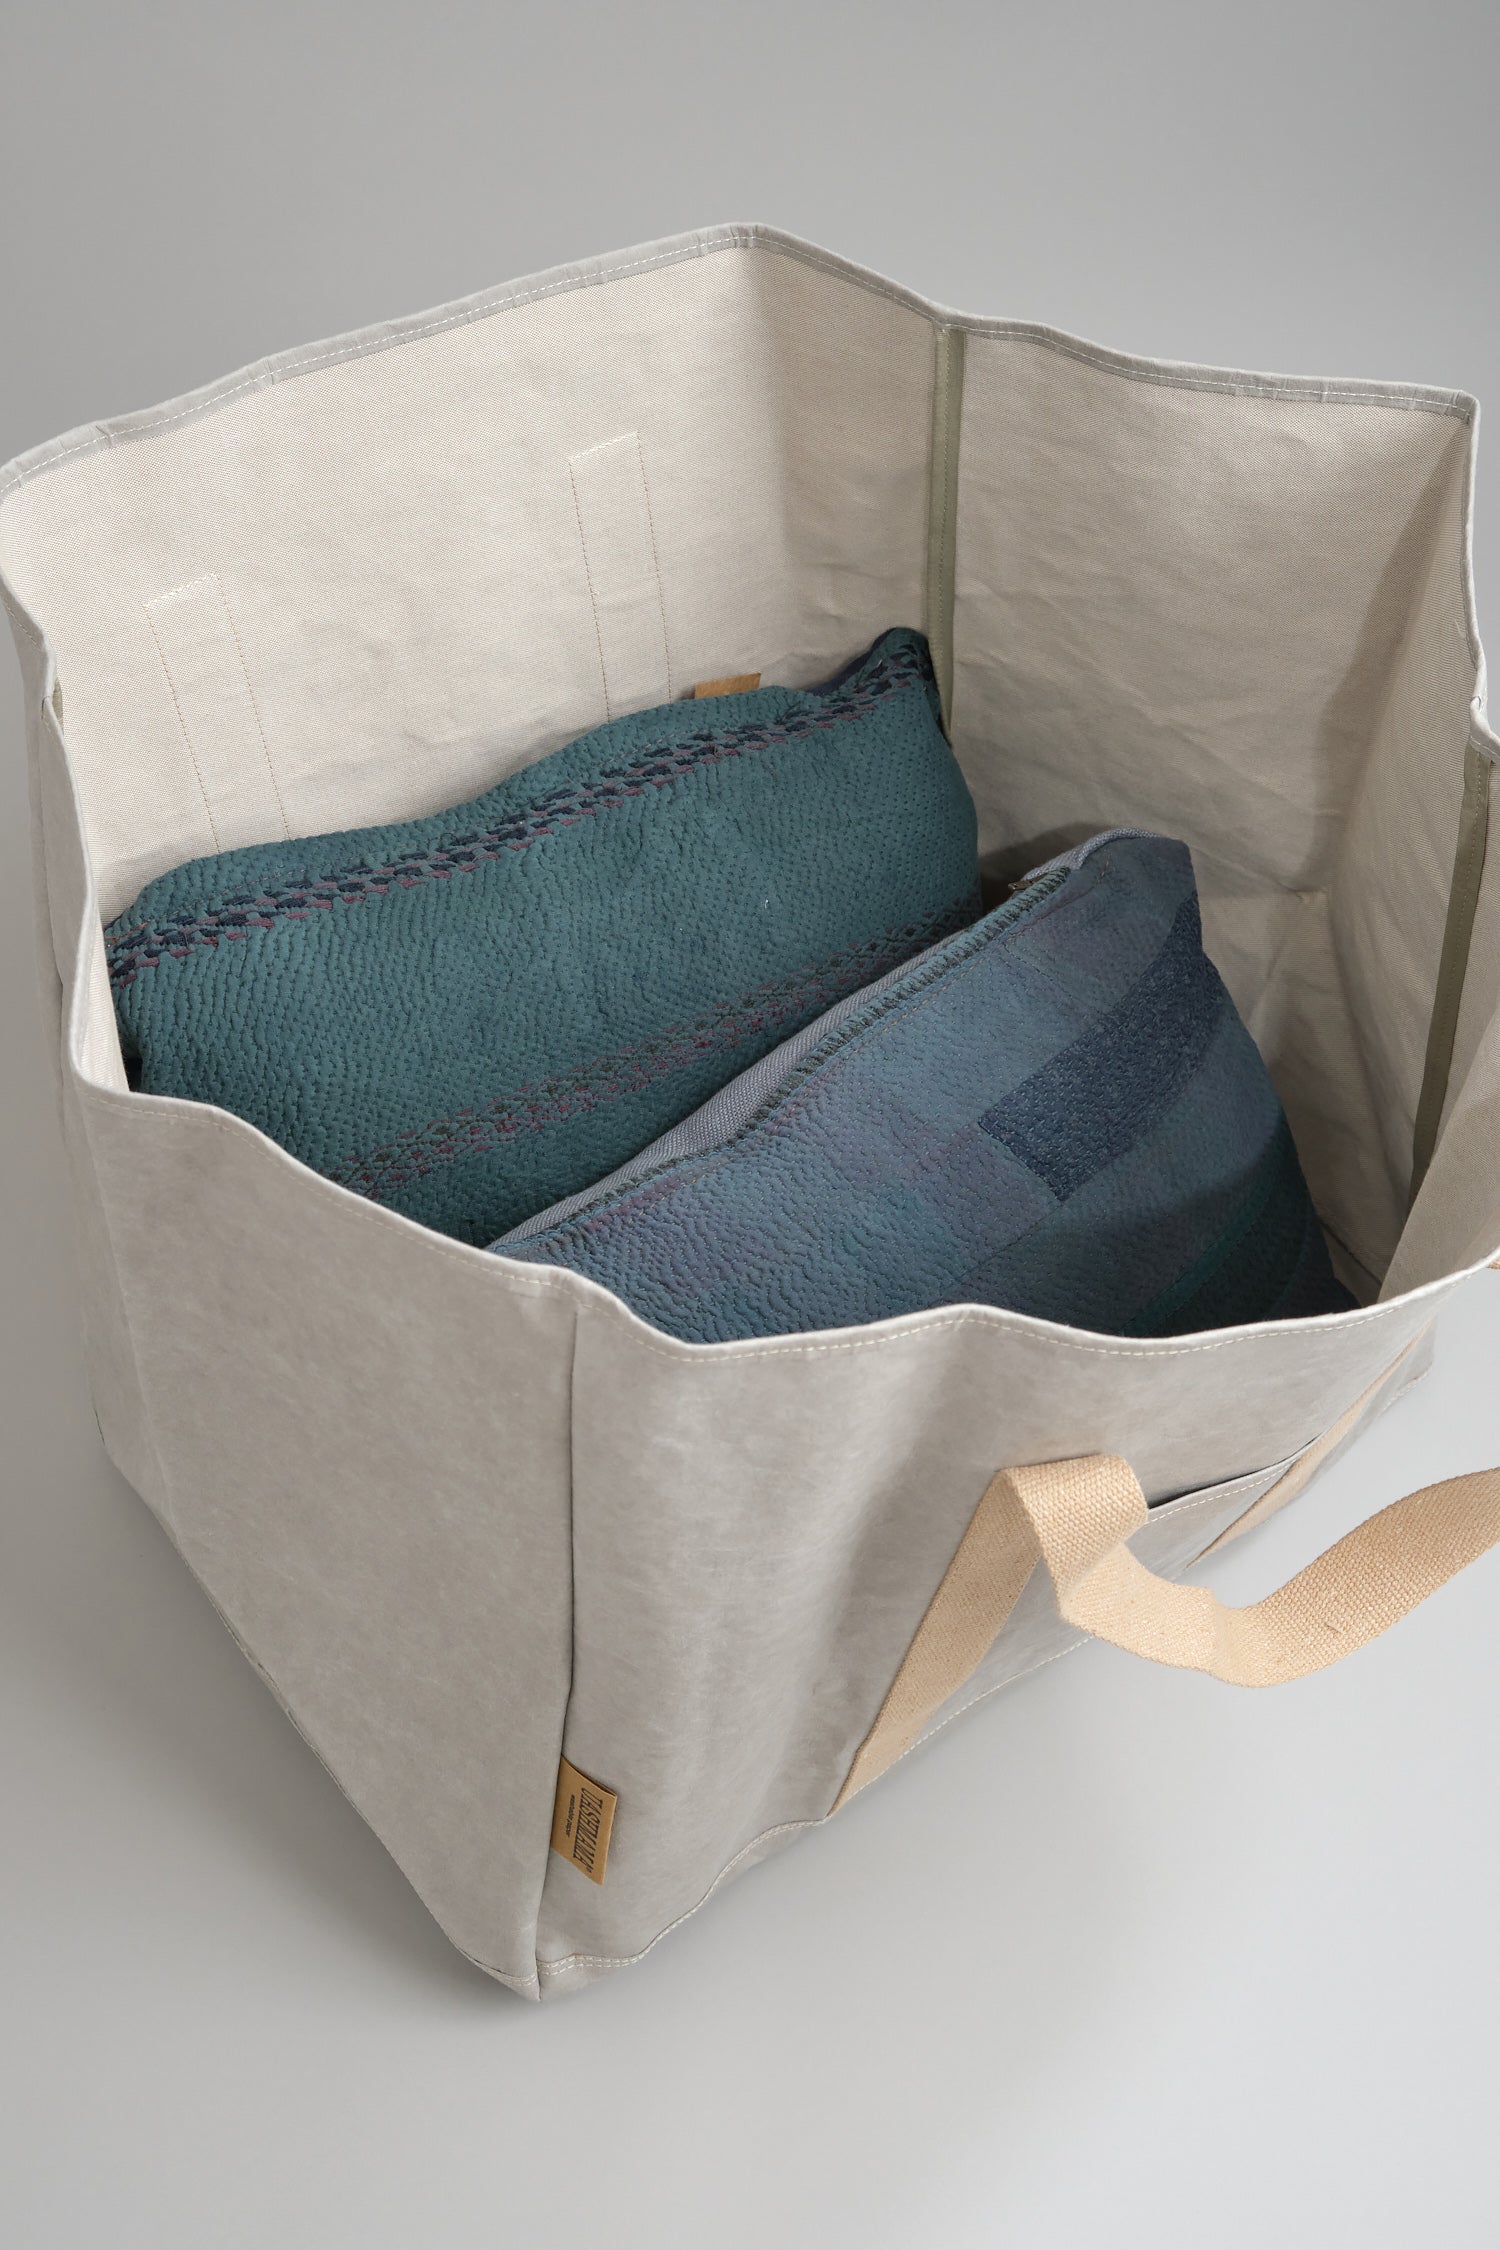 Wood Bag with pillows